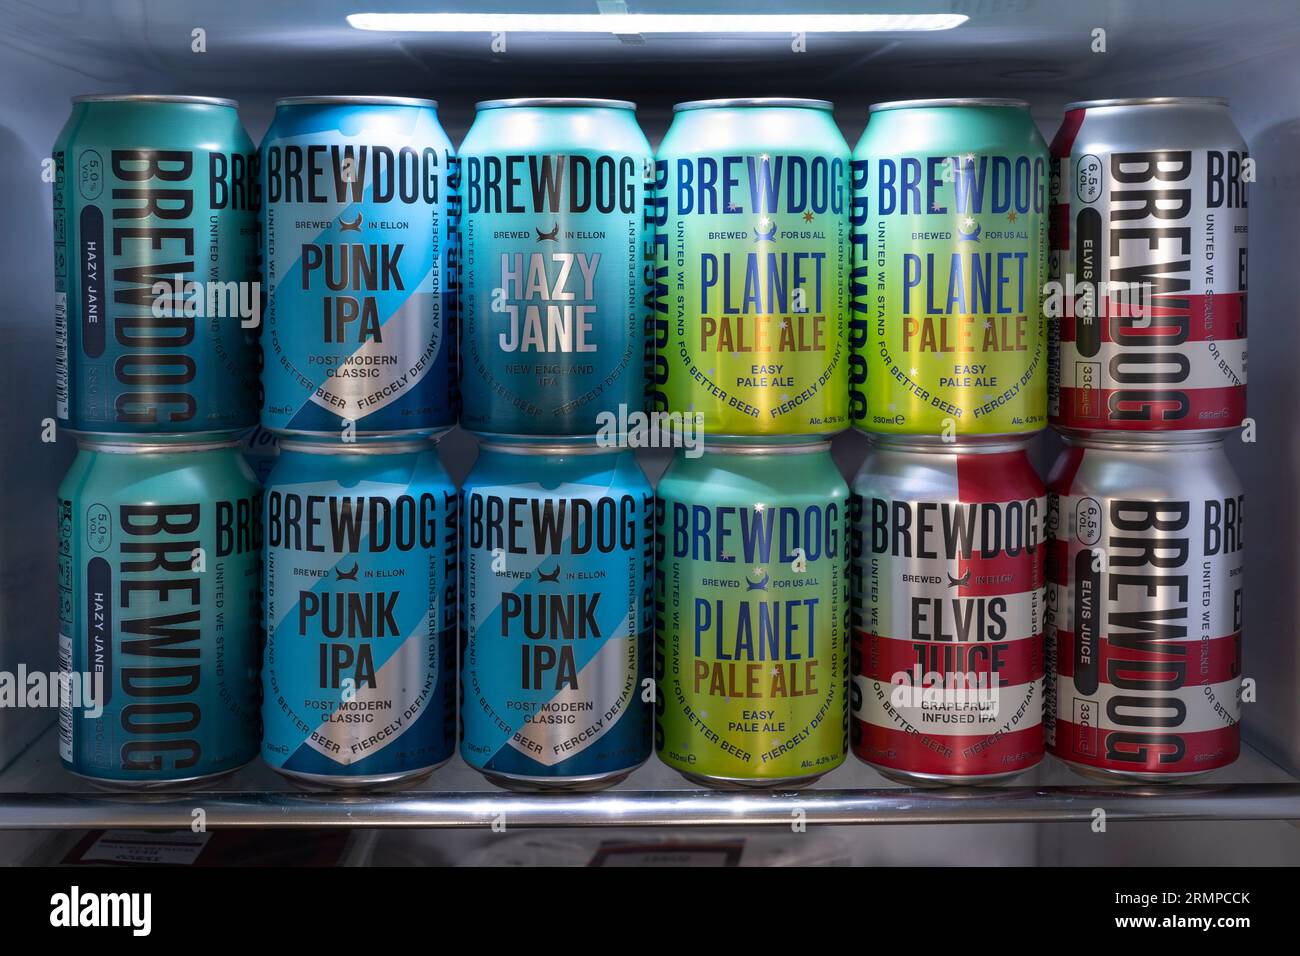 A selection of BrewDog IPA cans, including Punk IPA, Planet Pale Ale, Elvis Juice and Hazy Jane filling a fridge. England, UK Stock Photo